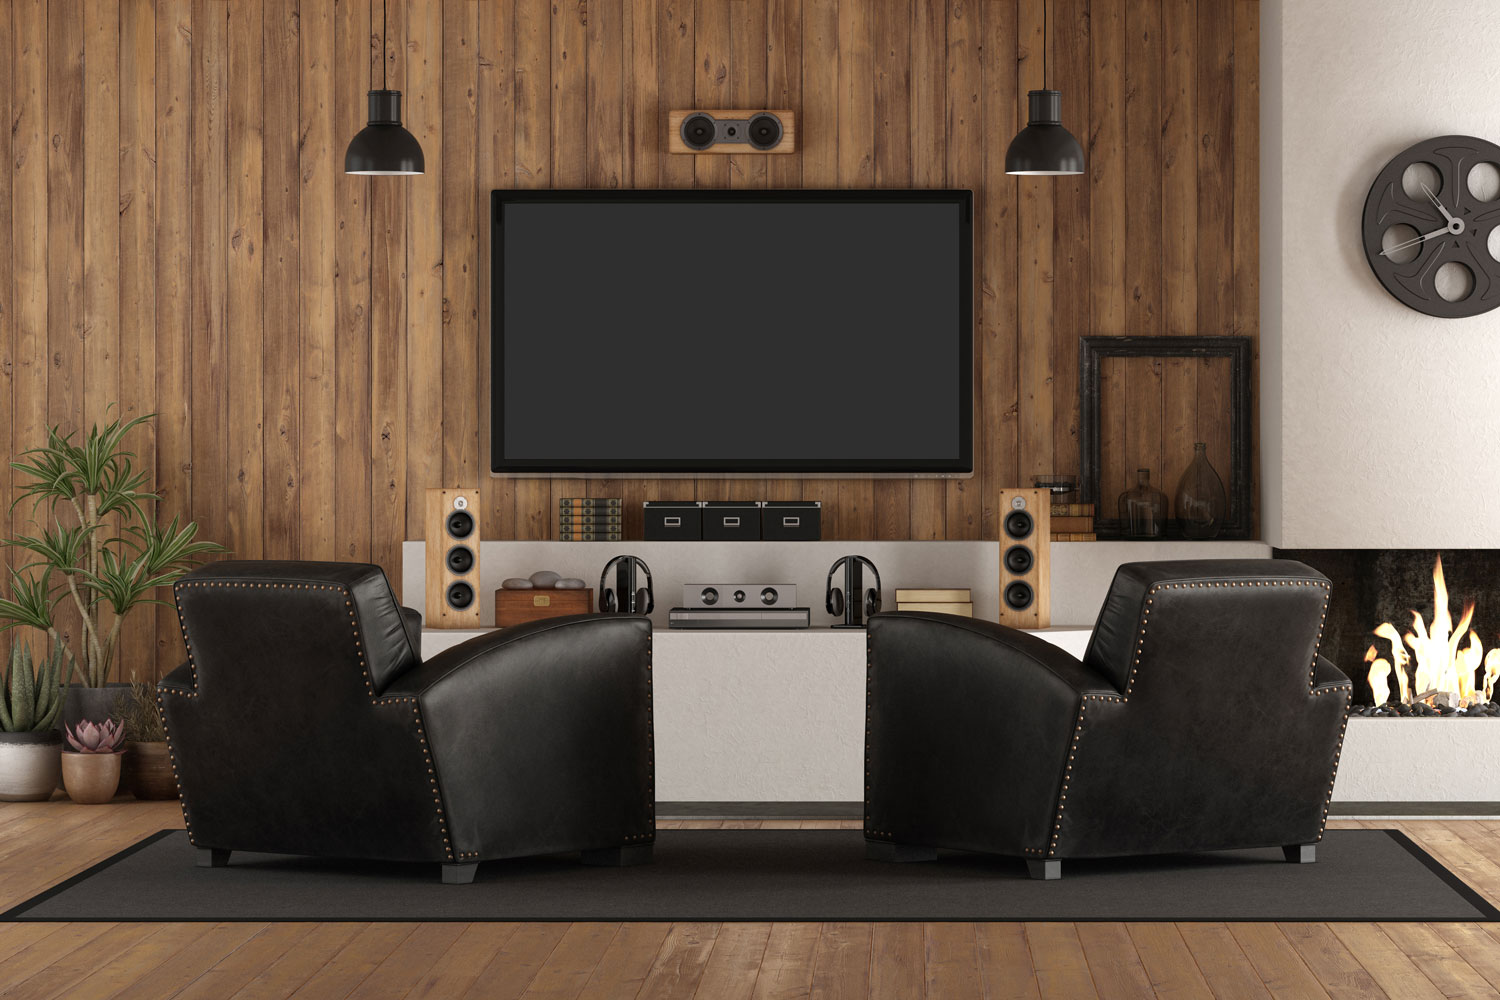 Wooden panel theatre room with black leather sofas and wooden flooring